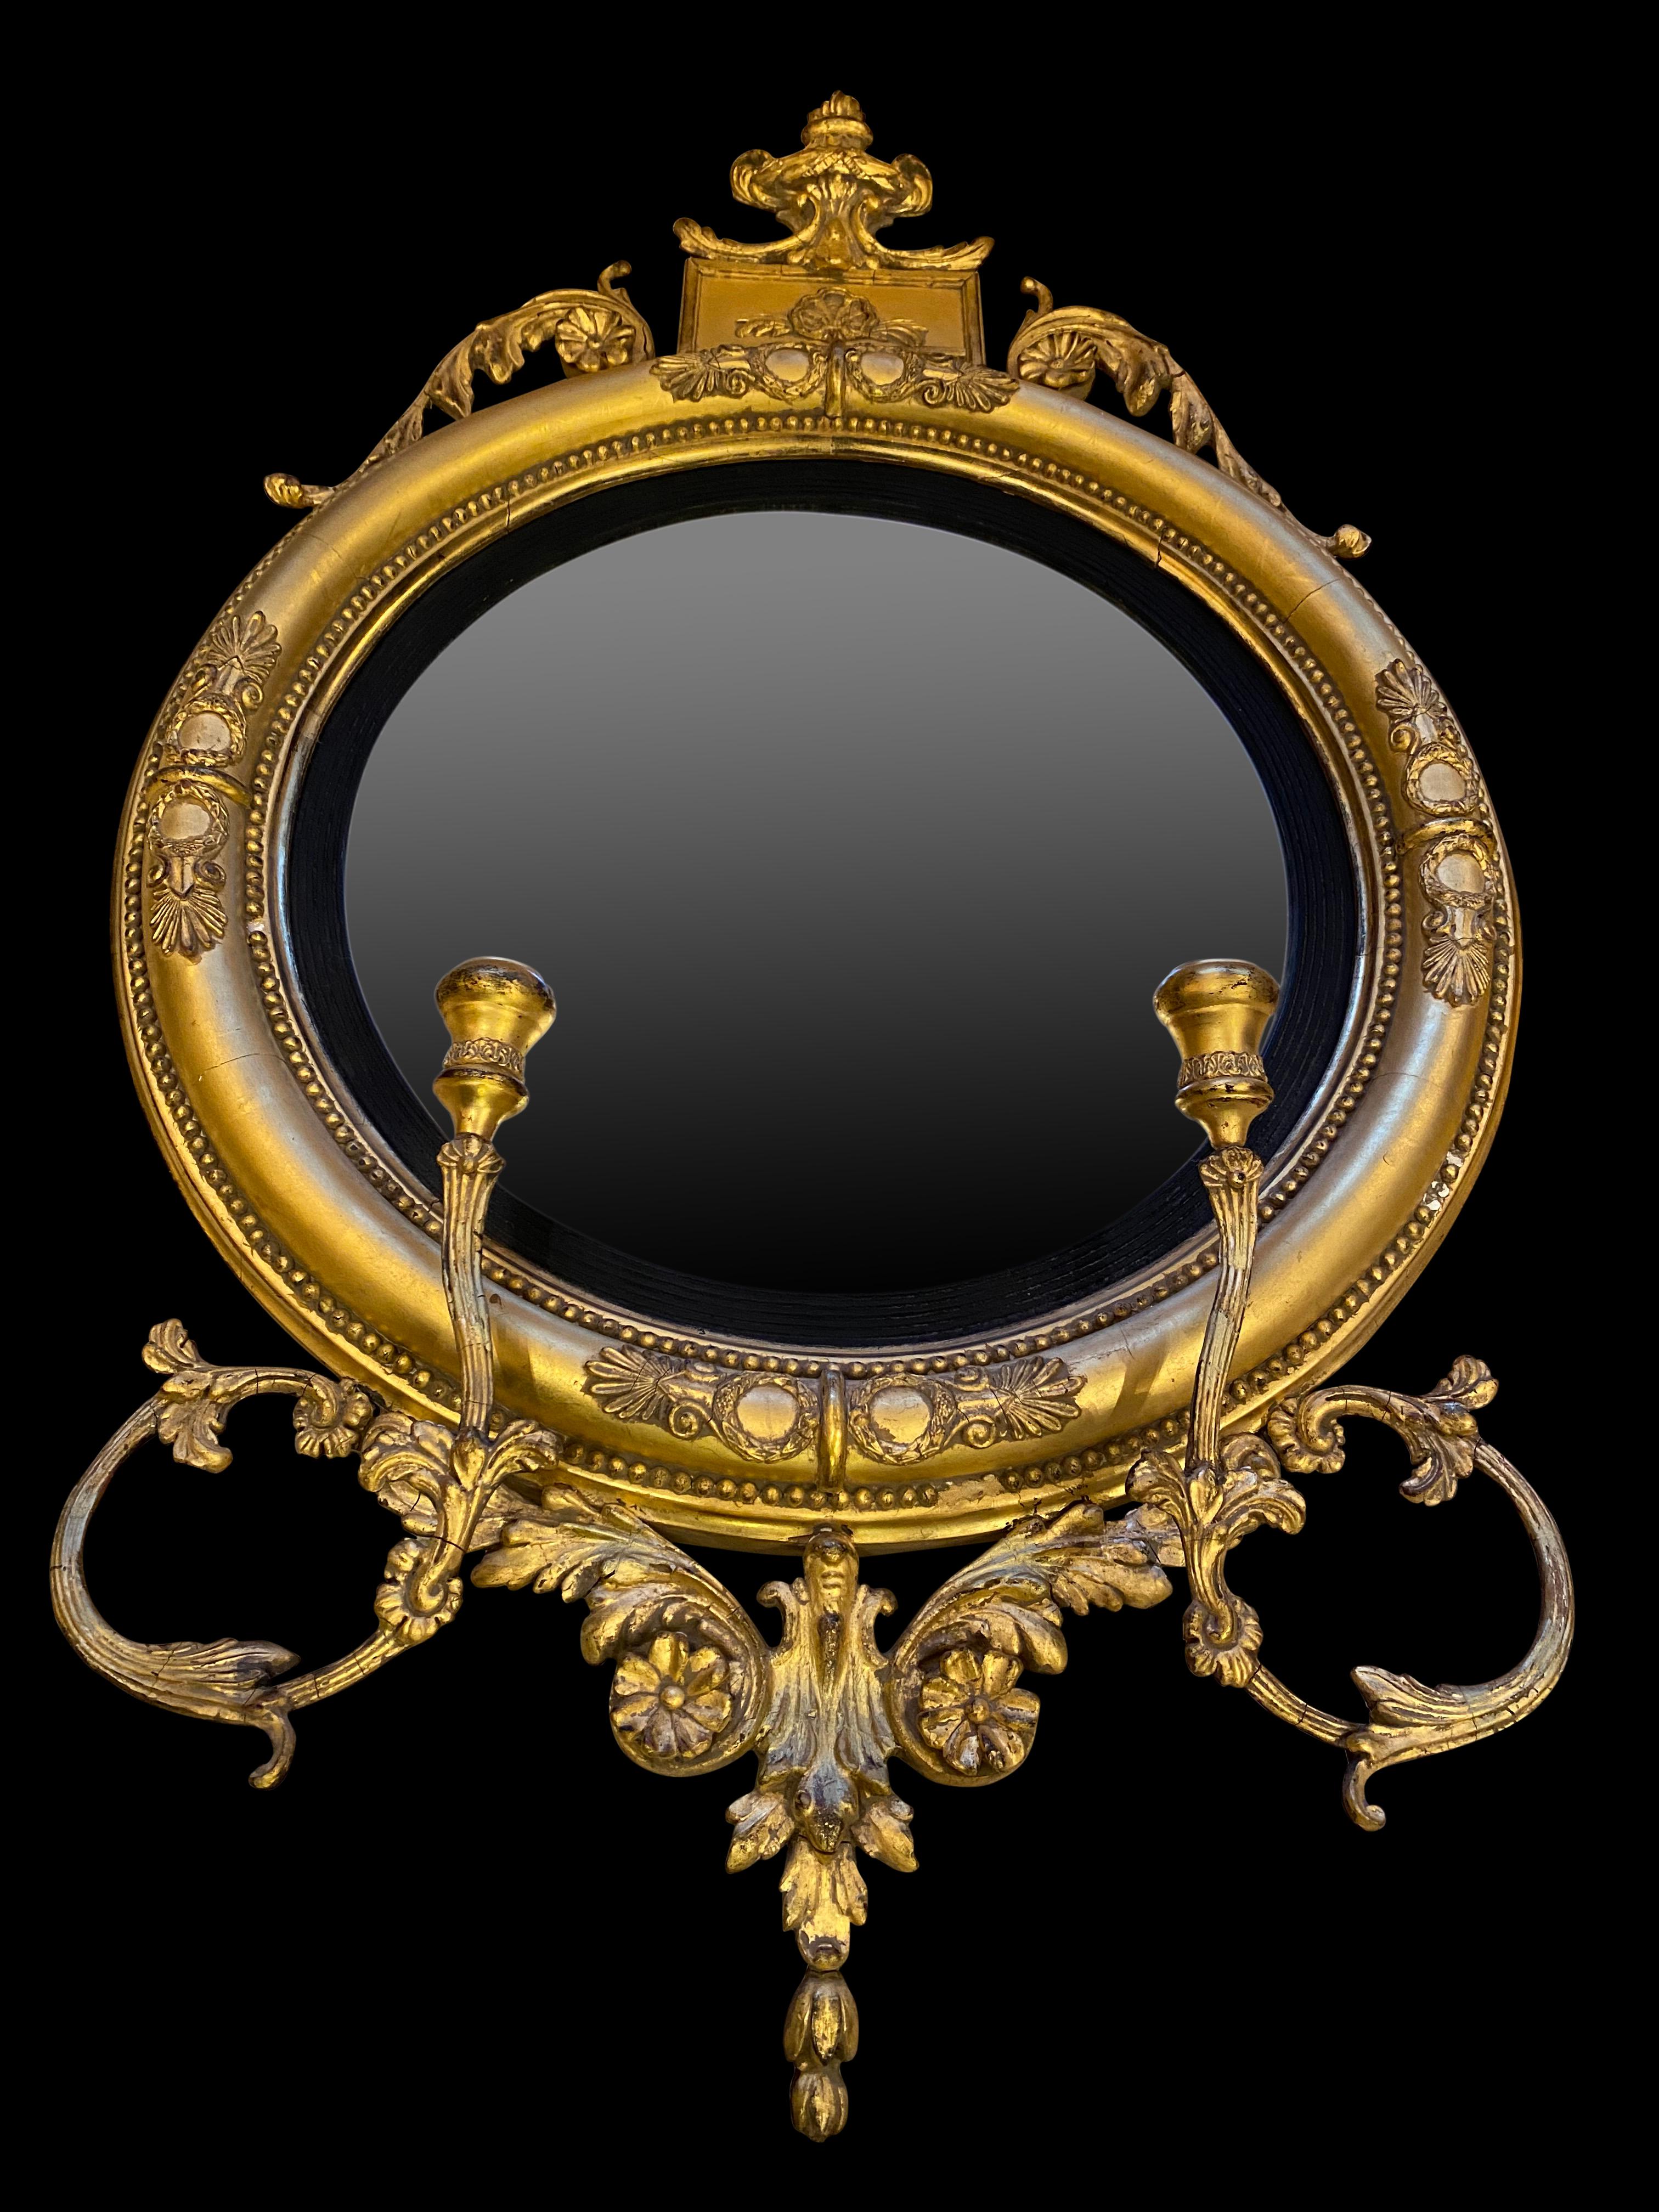 Fine Pair of Regency Convex Mirrors, English, circa 1820 For Sale 4